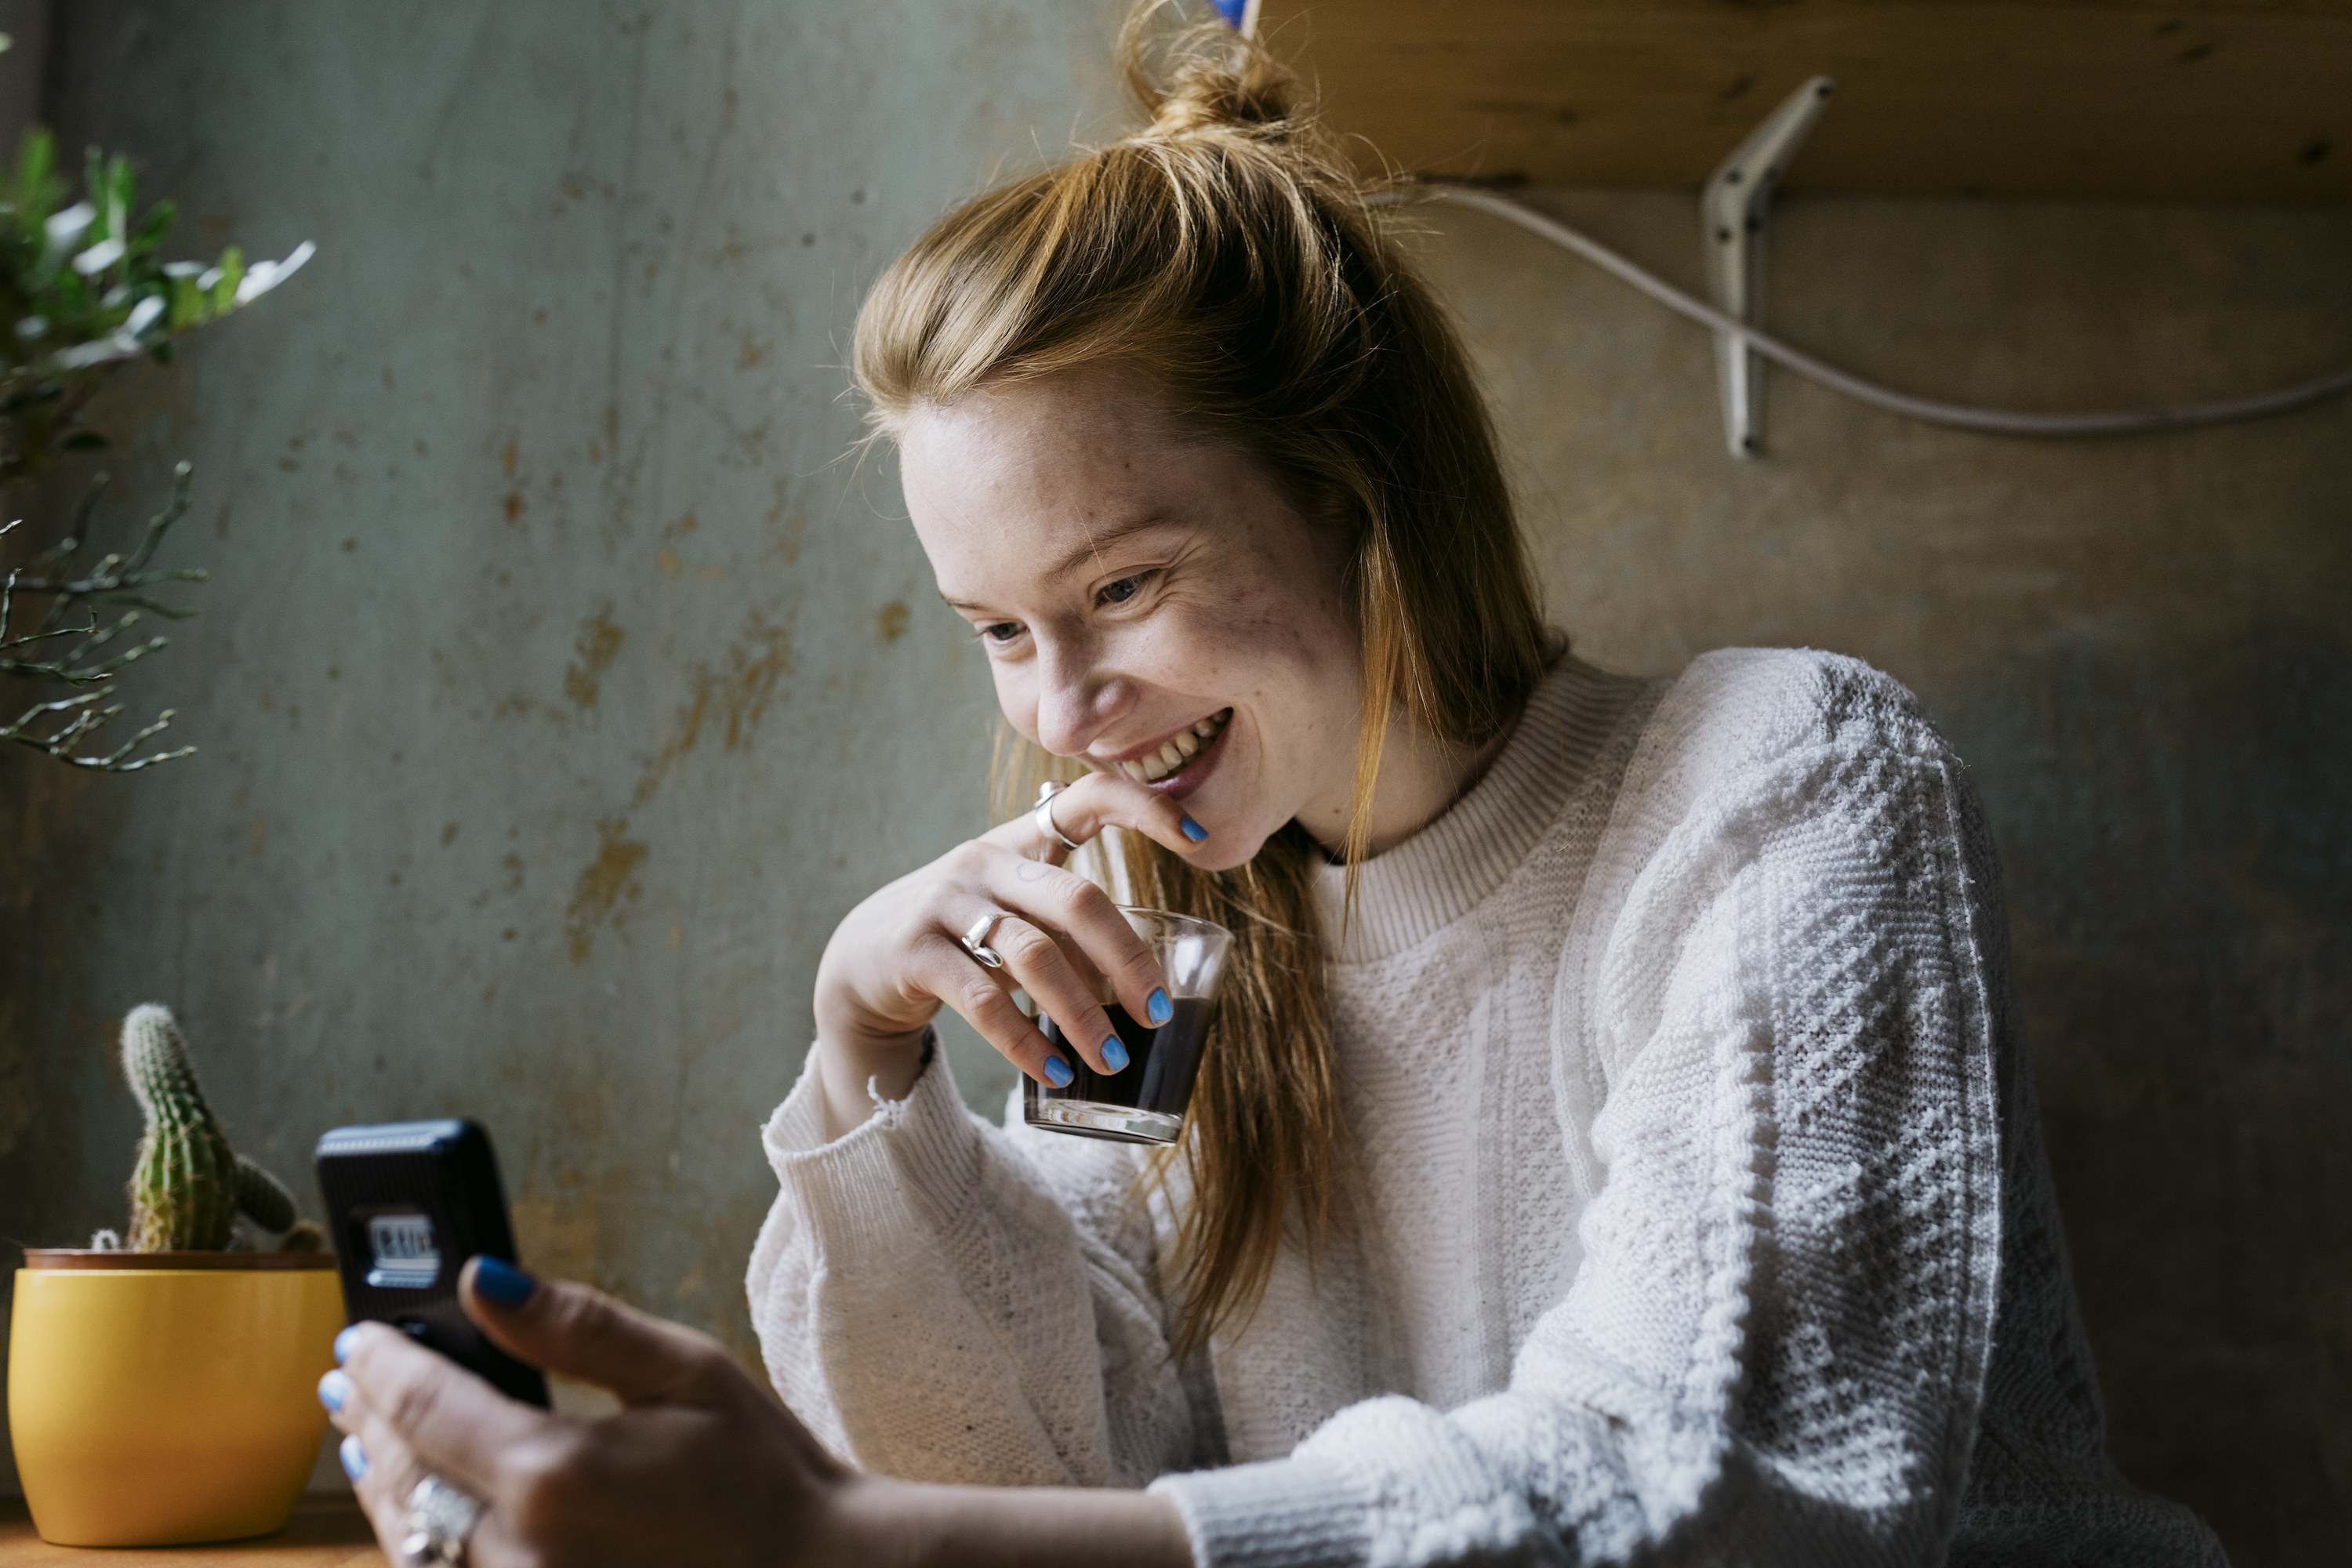 A woman smiling while on her phone